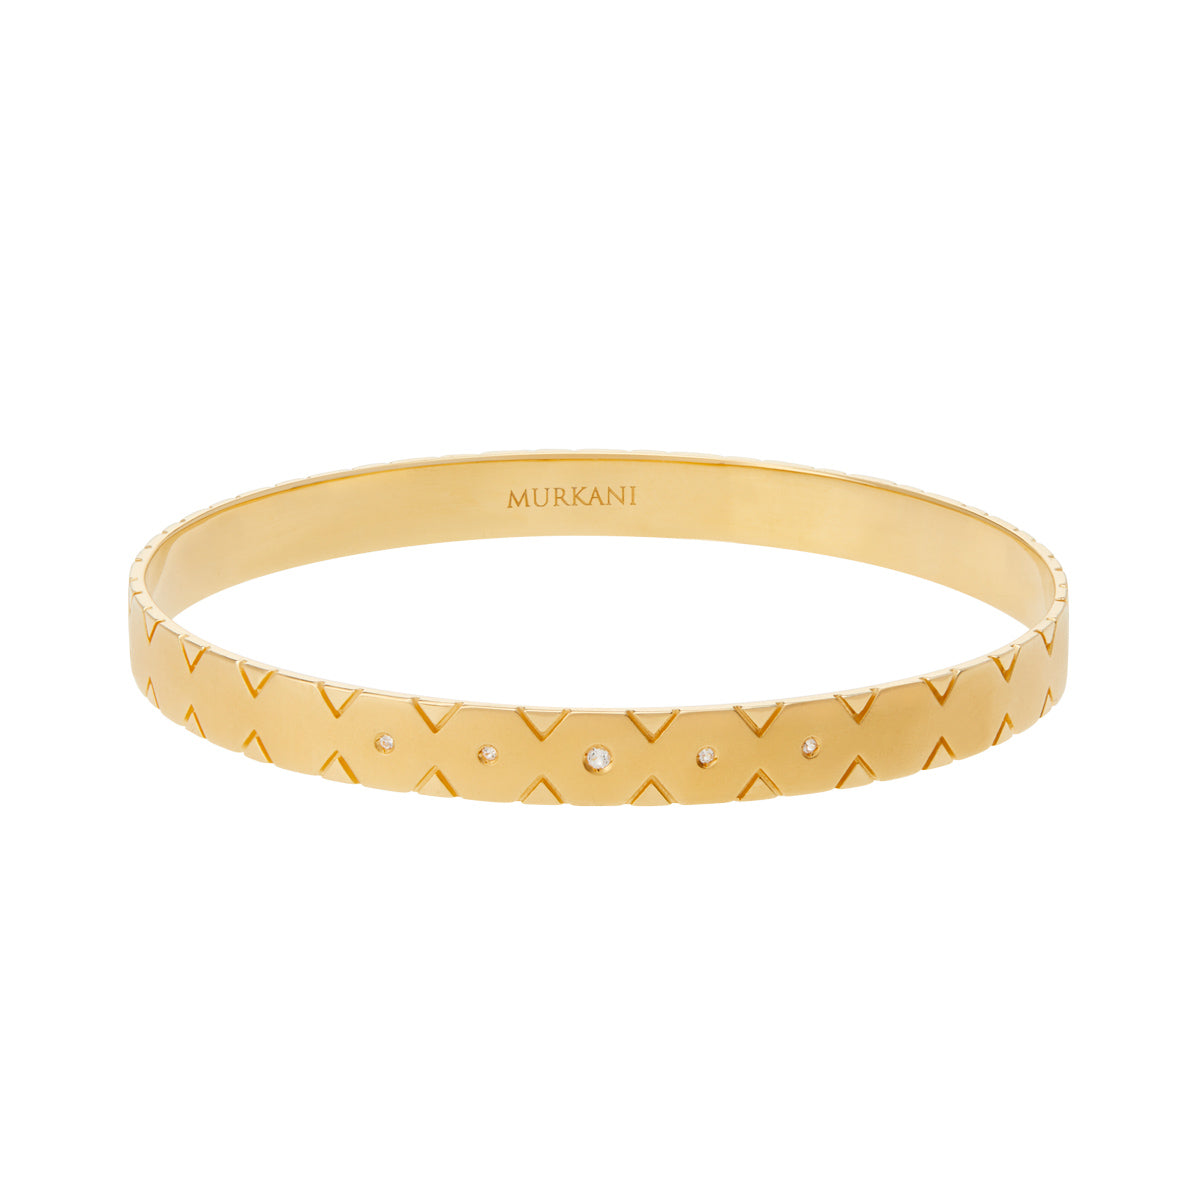 Modern gold bangle with Celtic symbolism, perfect for stacking and making a statement. Inspired by ancient symbolism. 